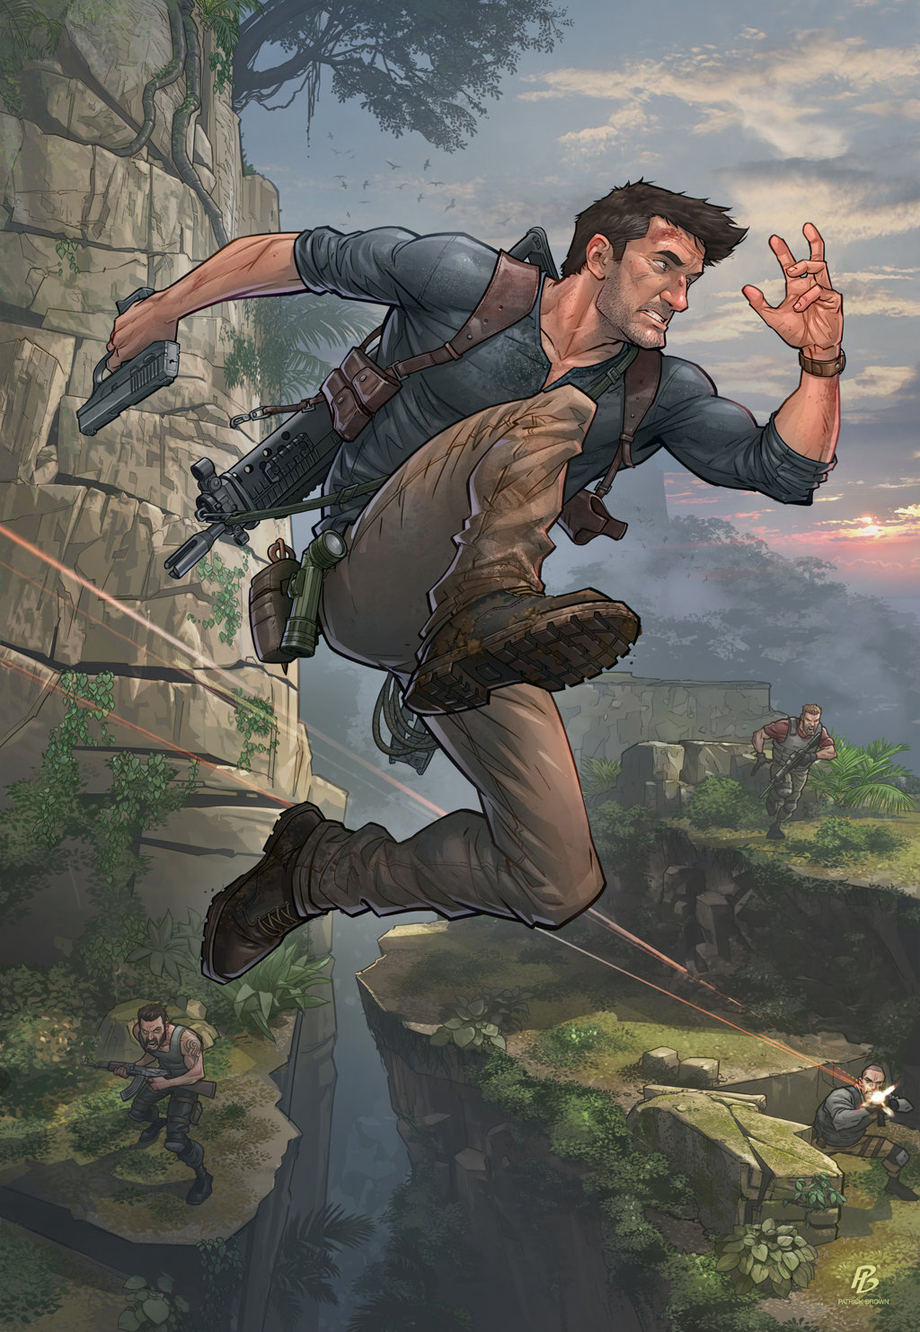 Fantastic Uncharted 4 fan art  based off of the 15-minute gameplay trailer